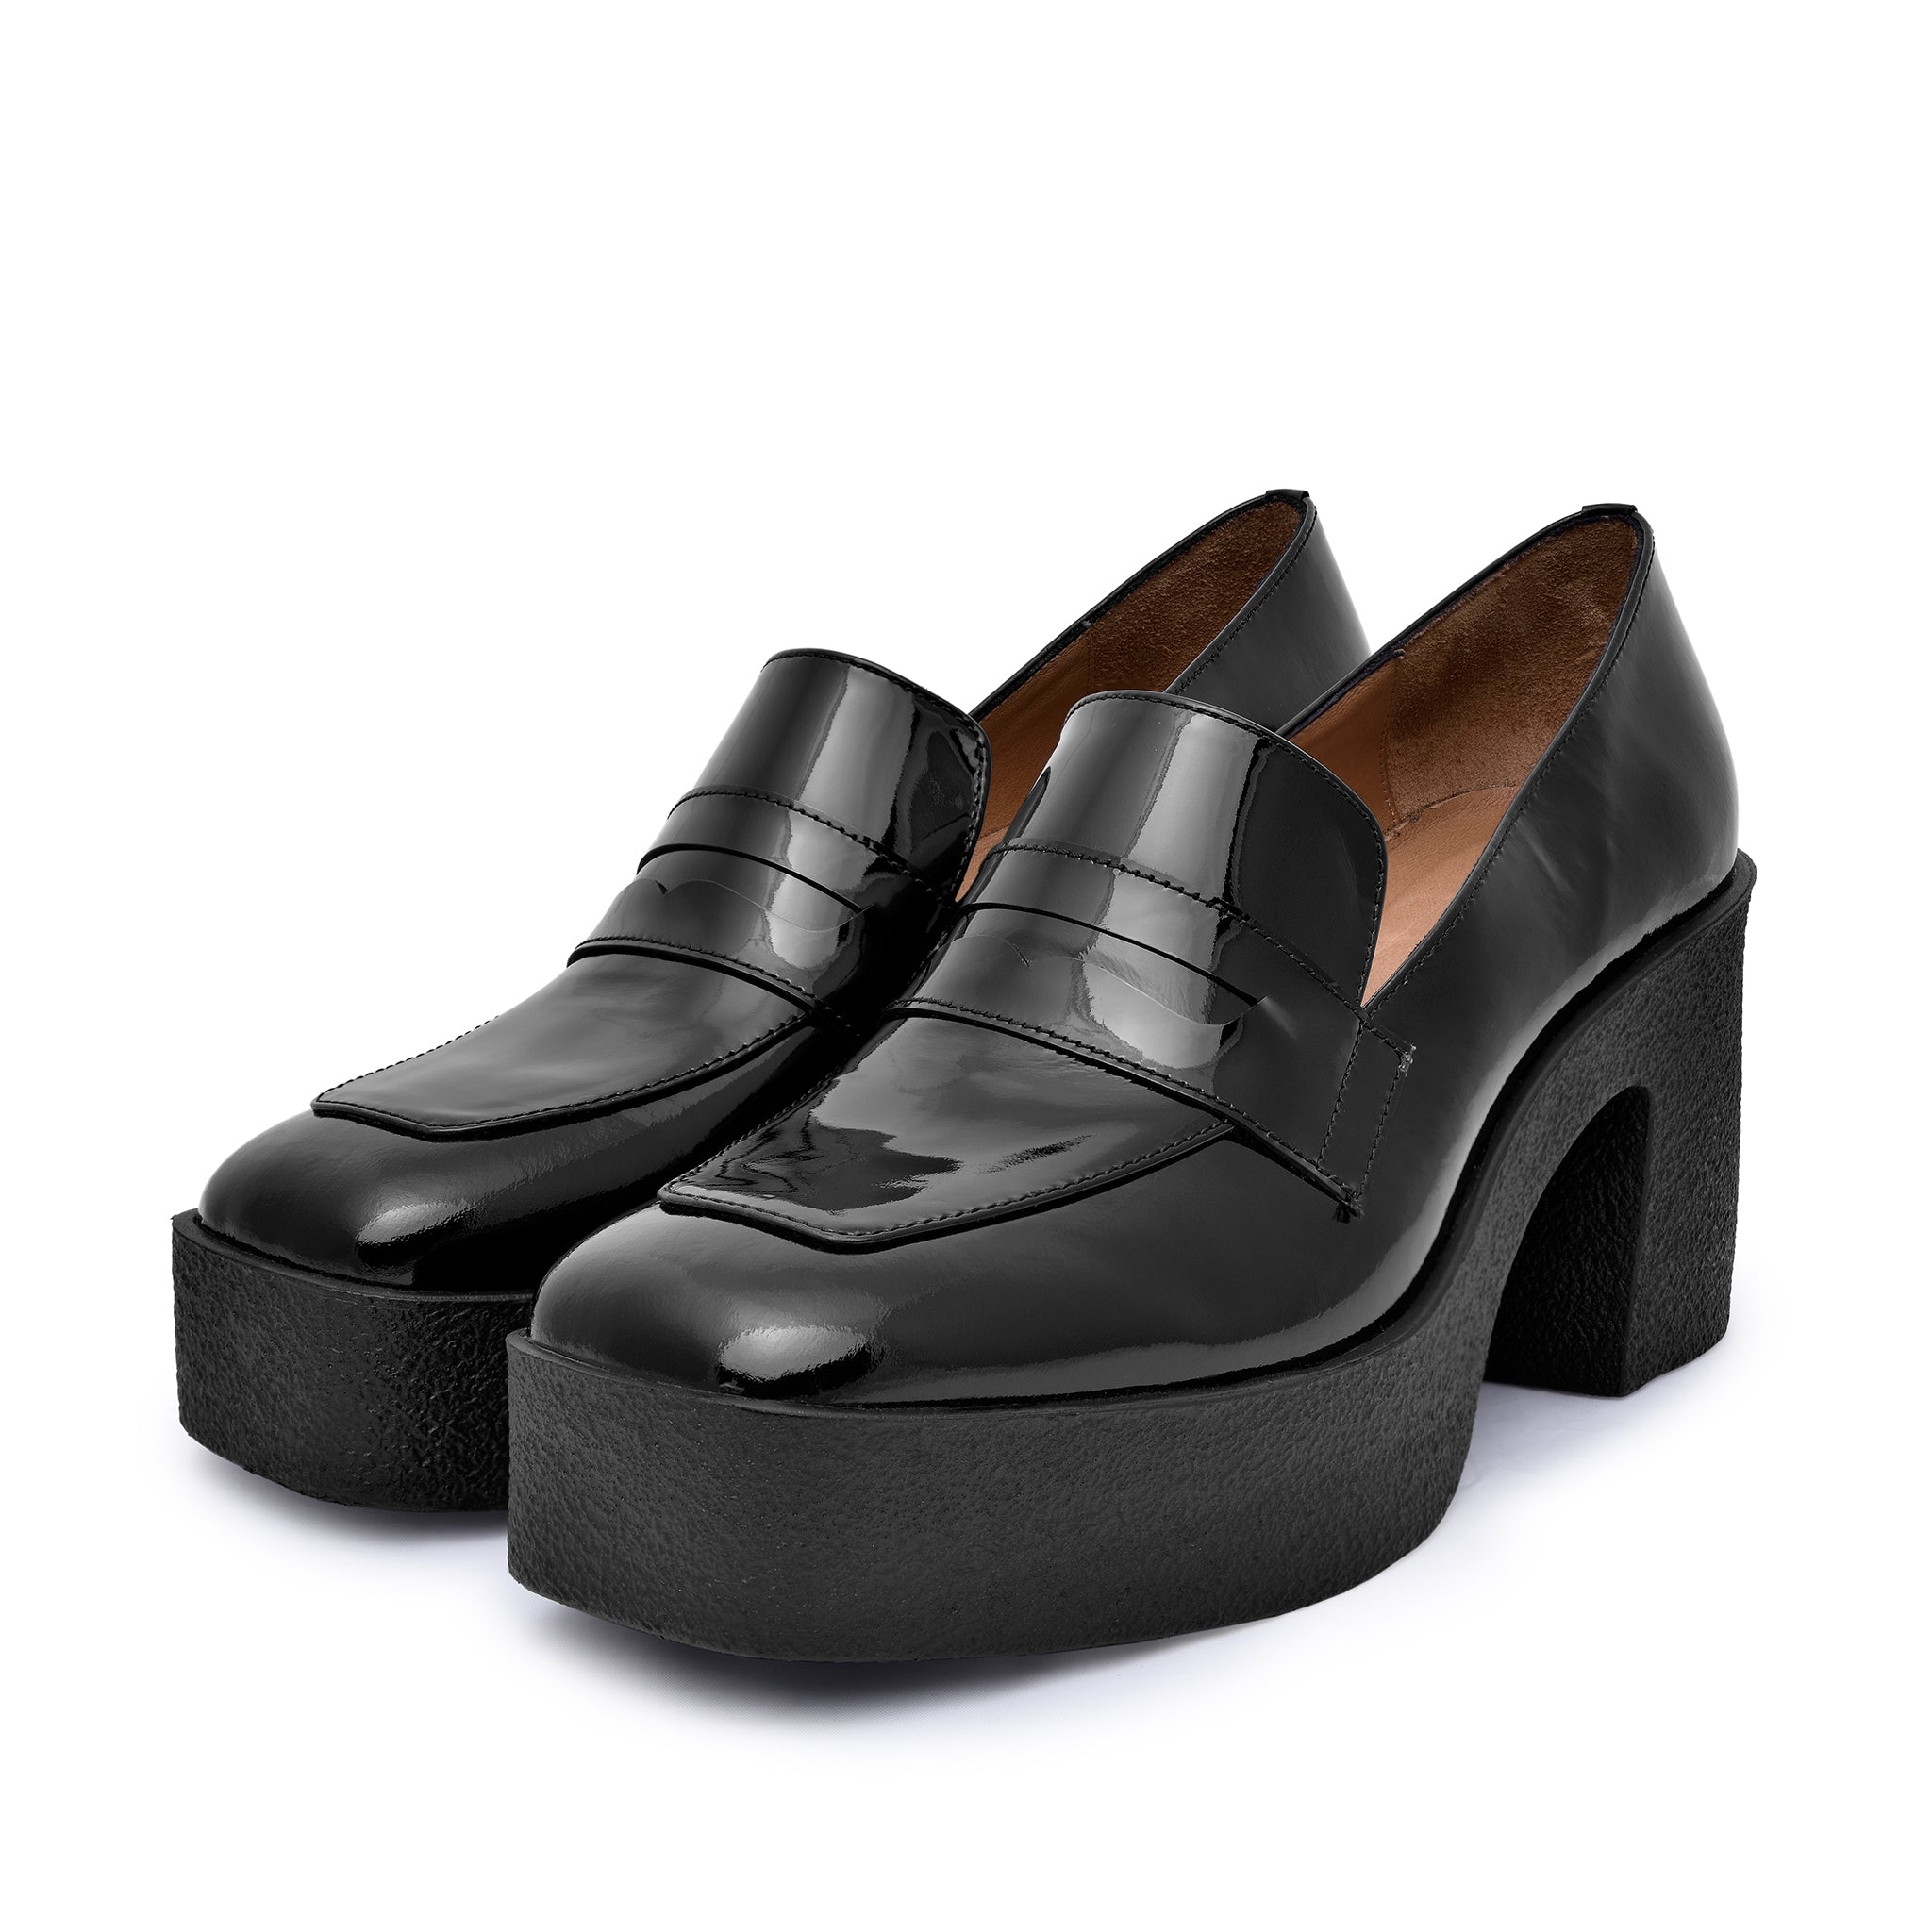 Yoko Black Patent Leather Chunky Loafers 21031-01-02 - 5